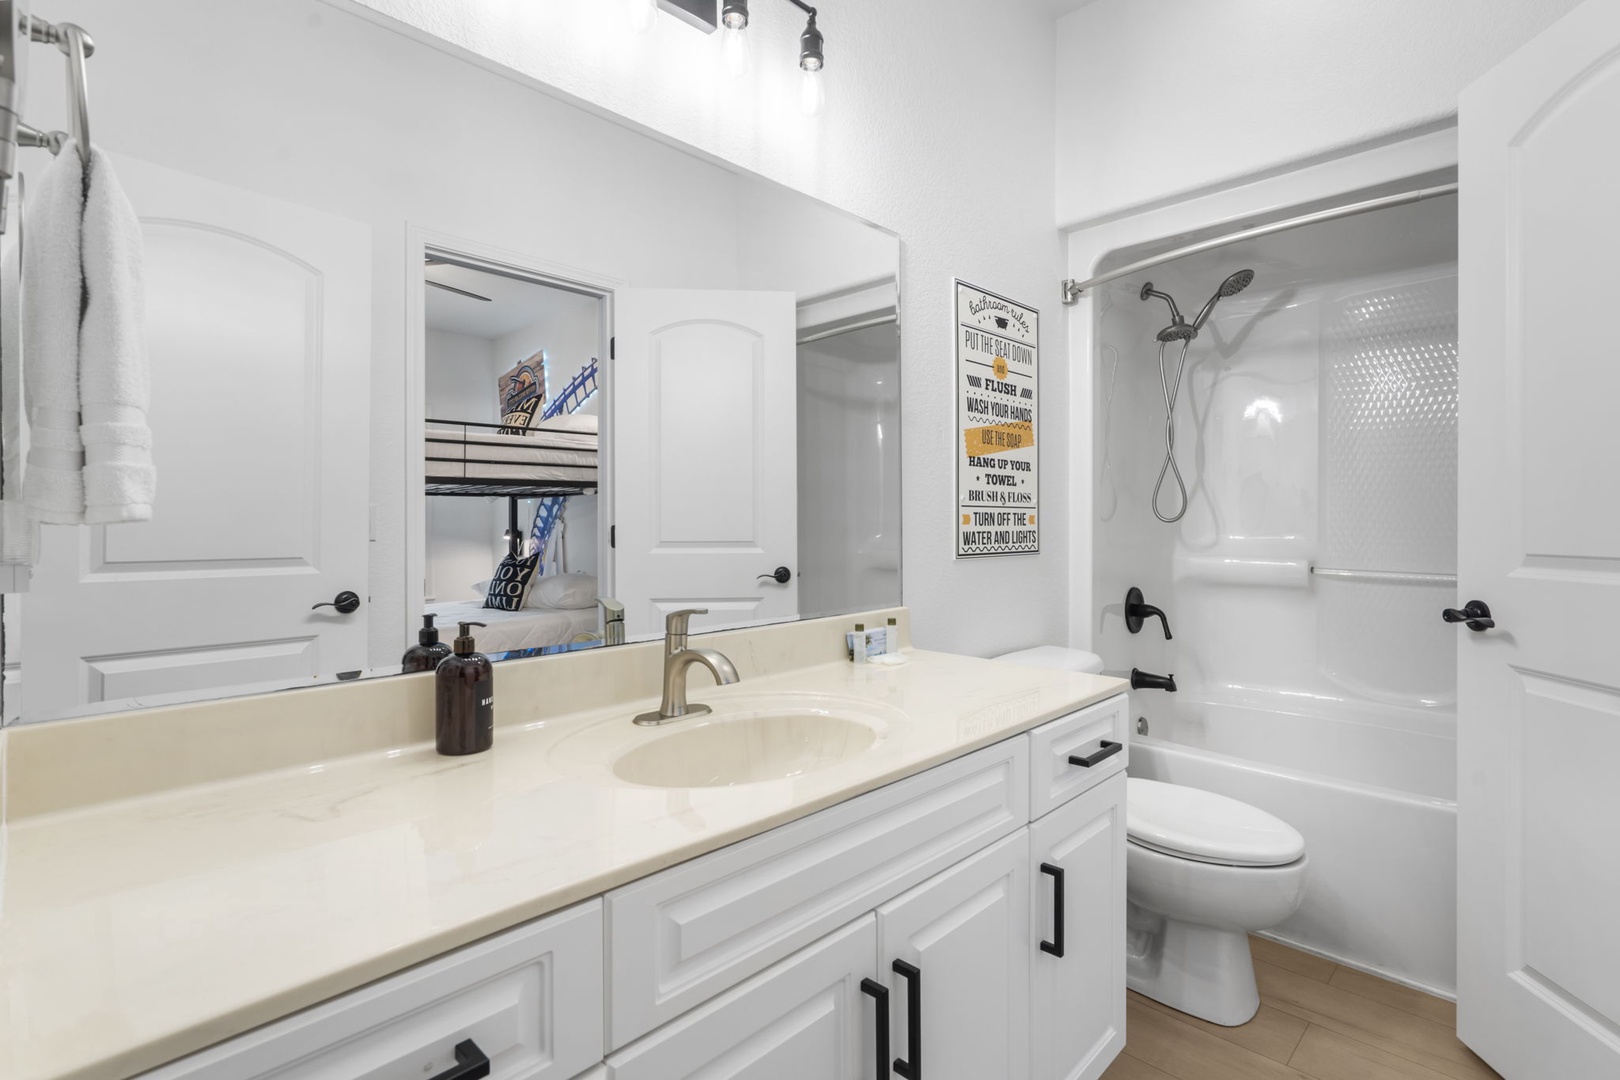 The bunk room ensuite offers an oversized single vanity and shower tub combo